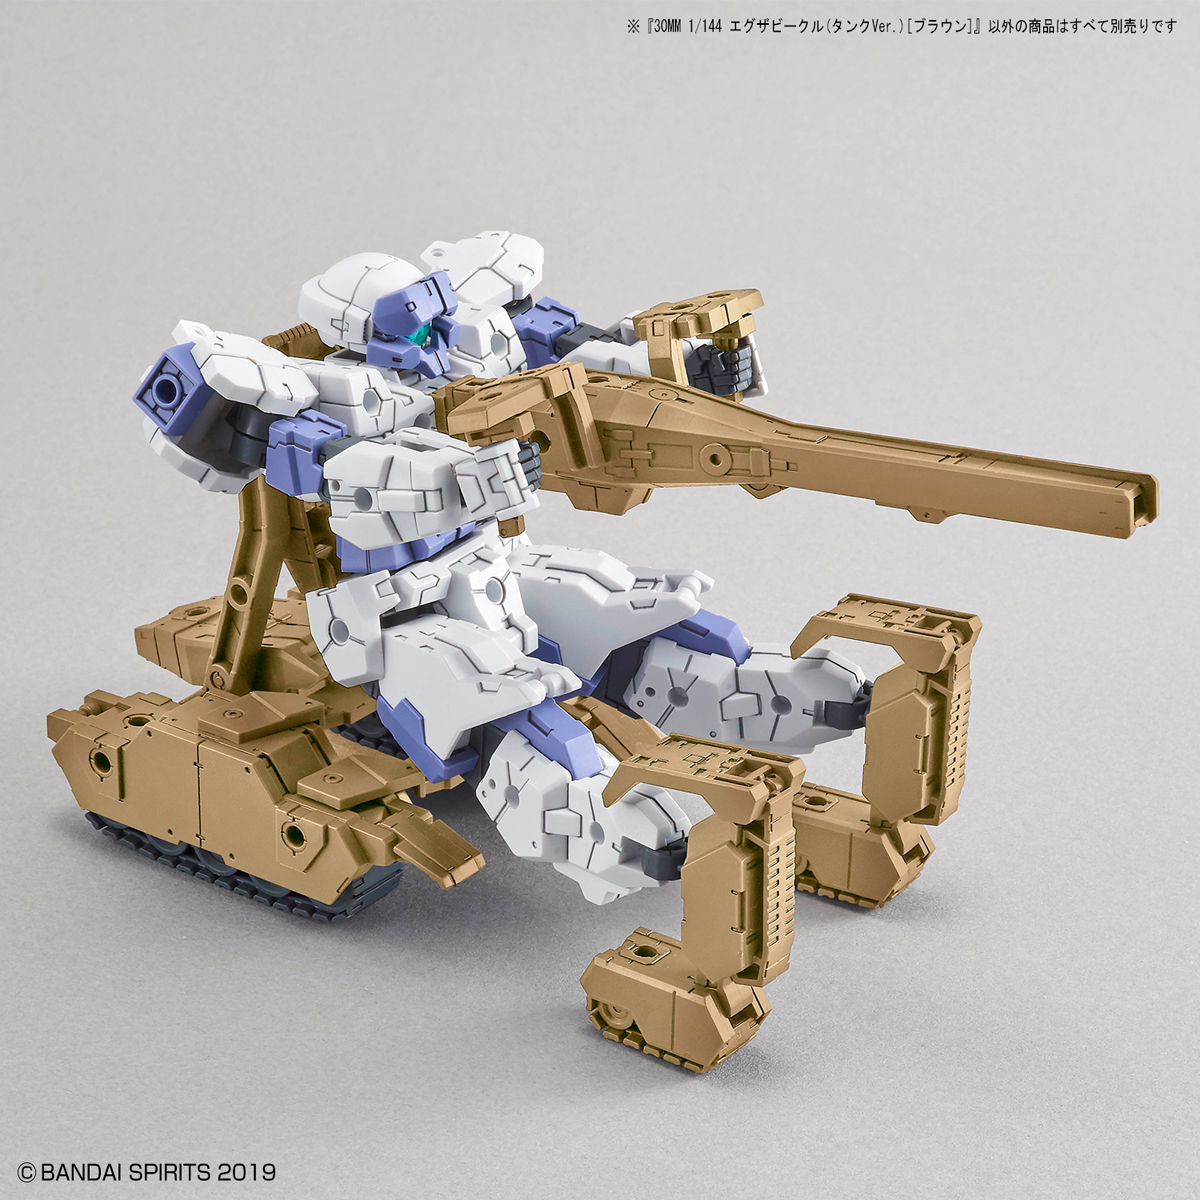 30MM Extended Armament Vehicle (Tank Ver.) (Brown) 1/144